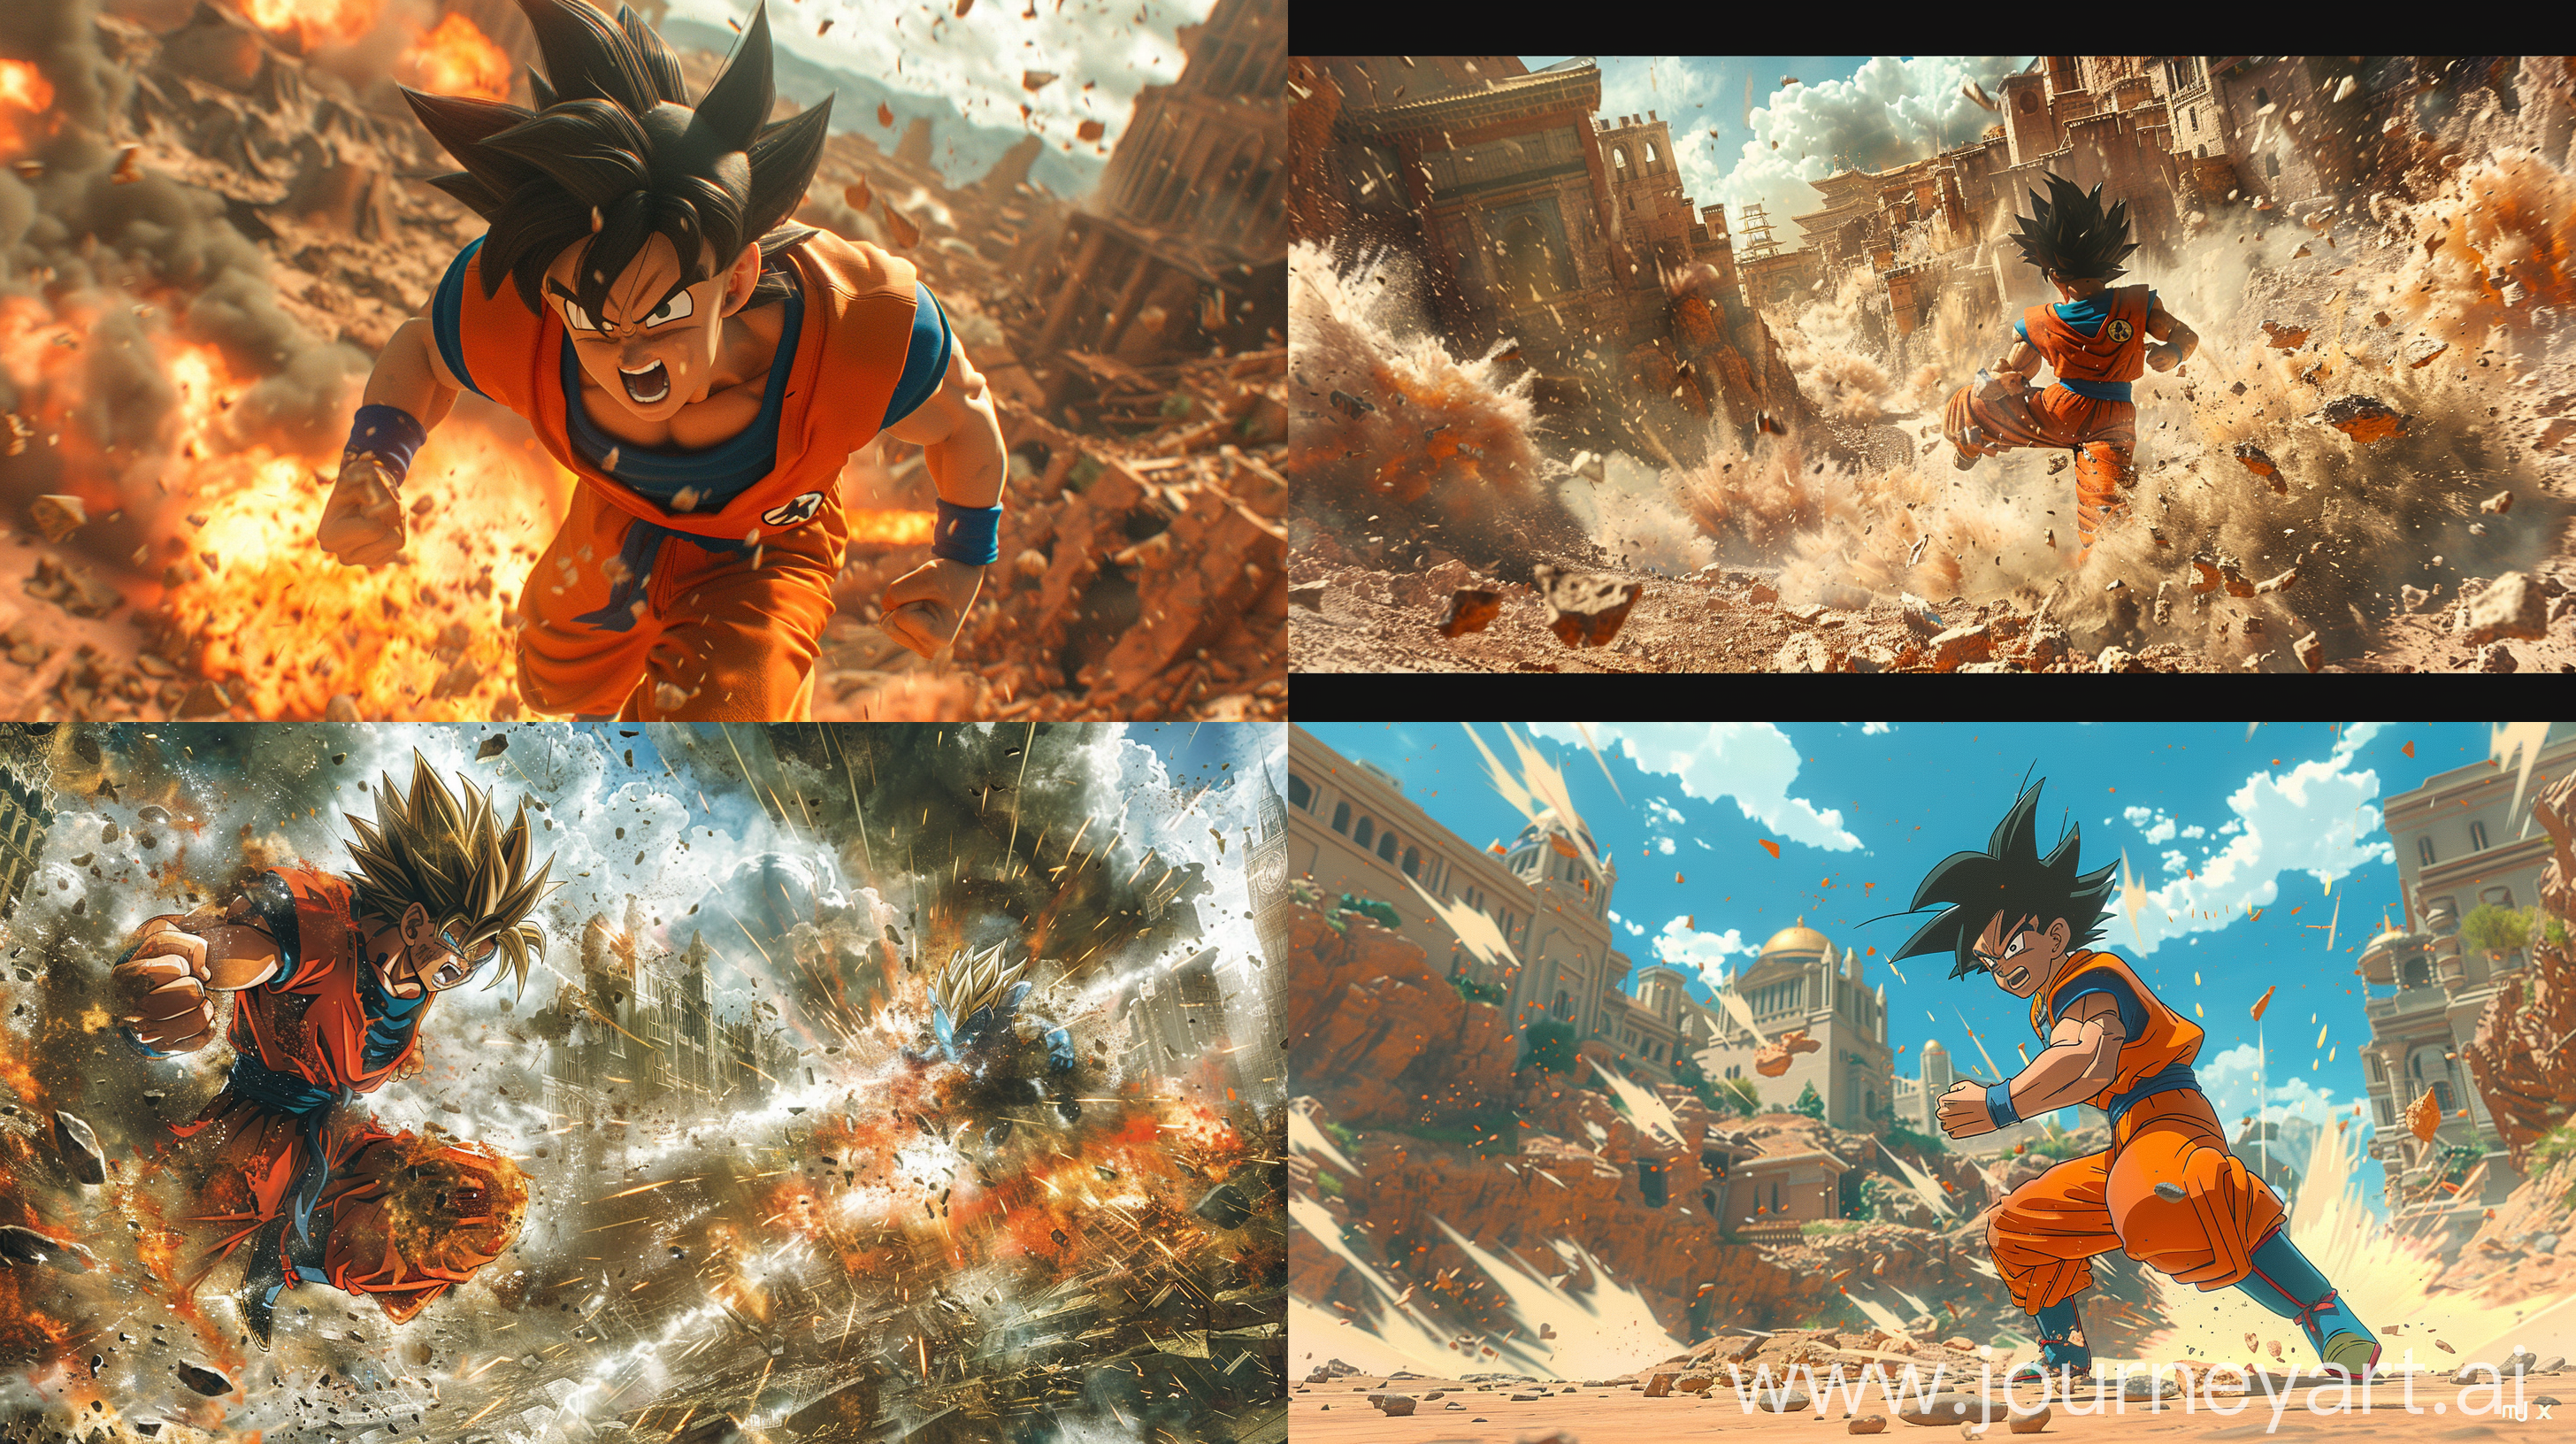 !mj1 Epic showdown, Goku in Super Saiyan form locked in a fierce battle with Ben 10's Alien X, amidst the ruins of a once-grand city, high-energy blast effects, extreme dynamic angles capturing the action, dust and debris flying, vibrant explosive colors --ar 16:9 --s 350 --c 15 --v 6